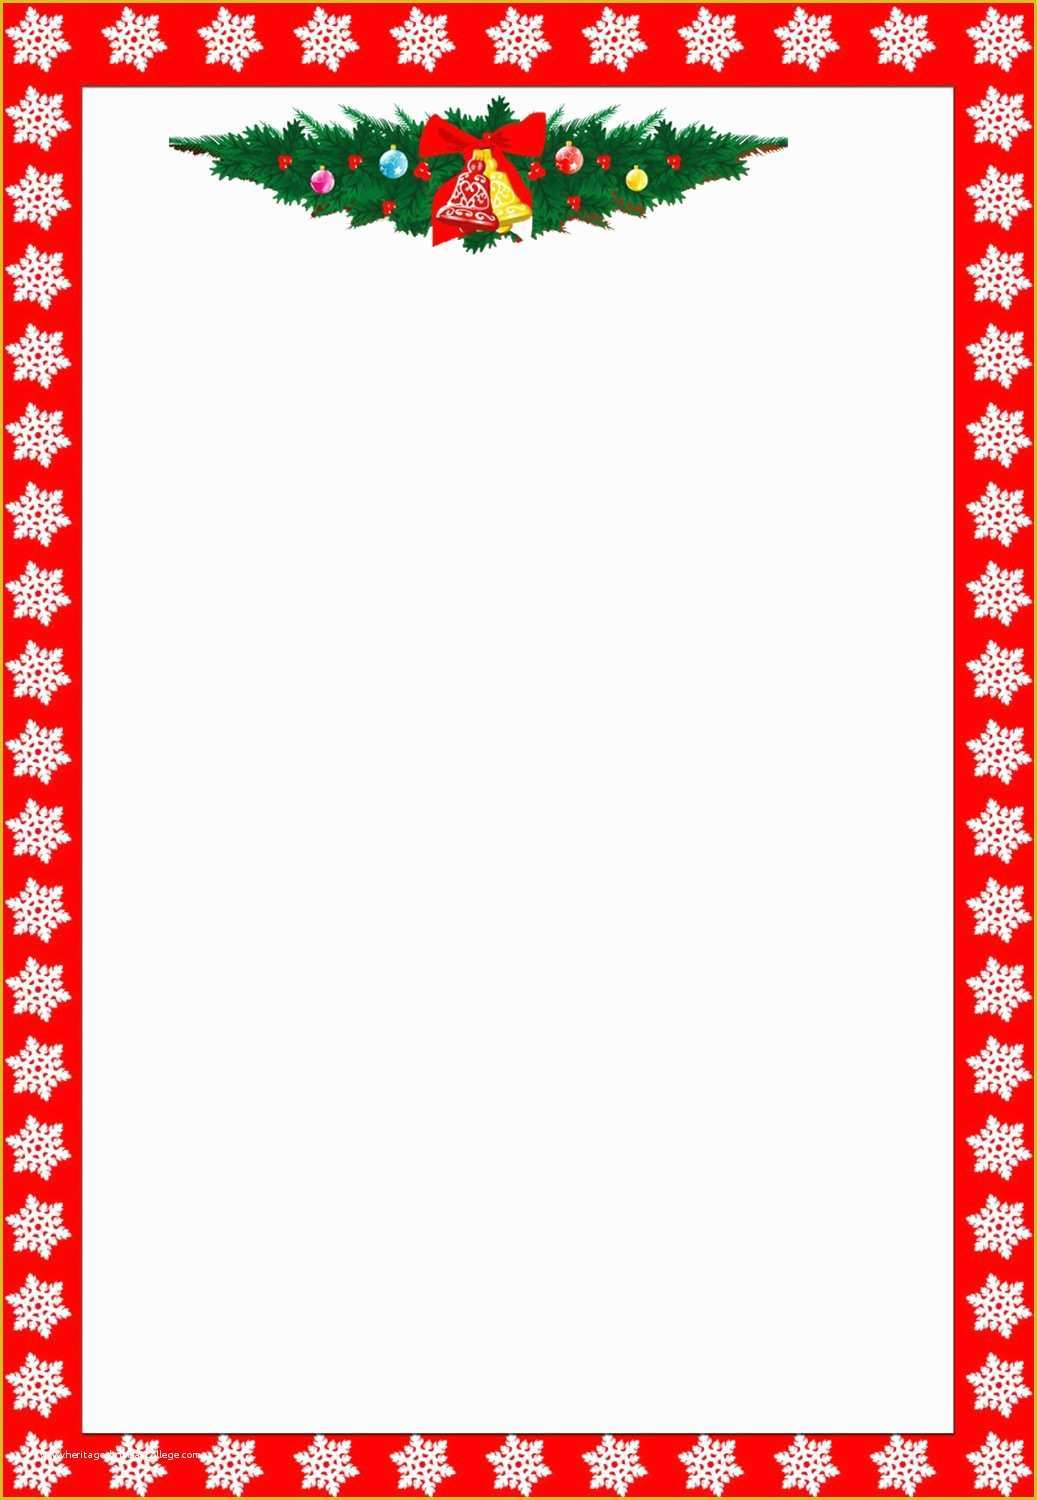 Christmas Letter Border Templates Free Of Christmas Letter Borders Free Printable